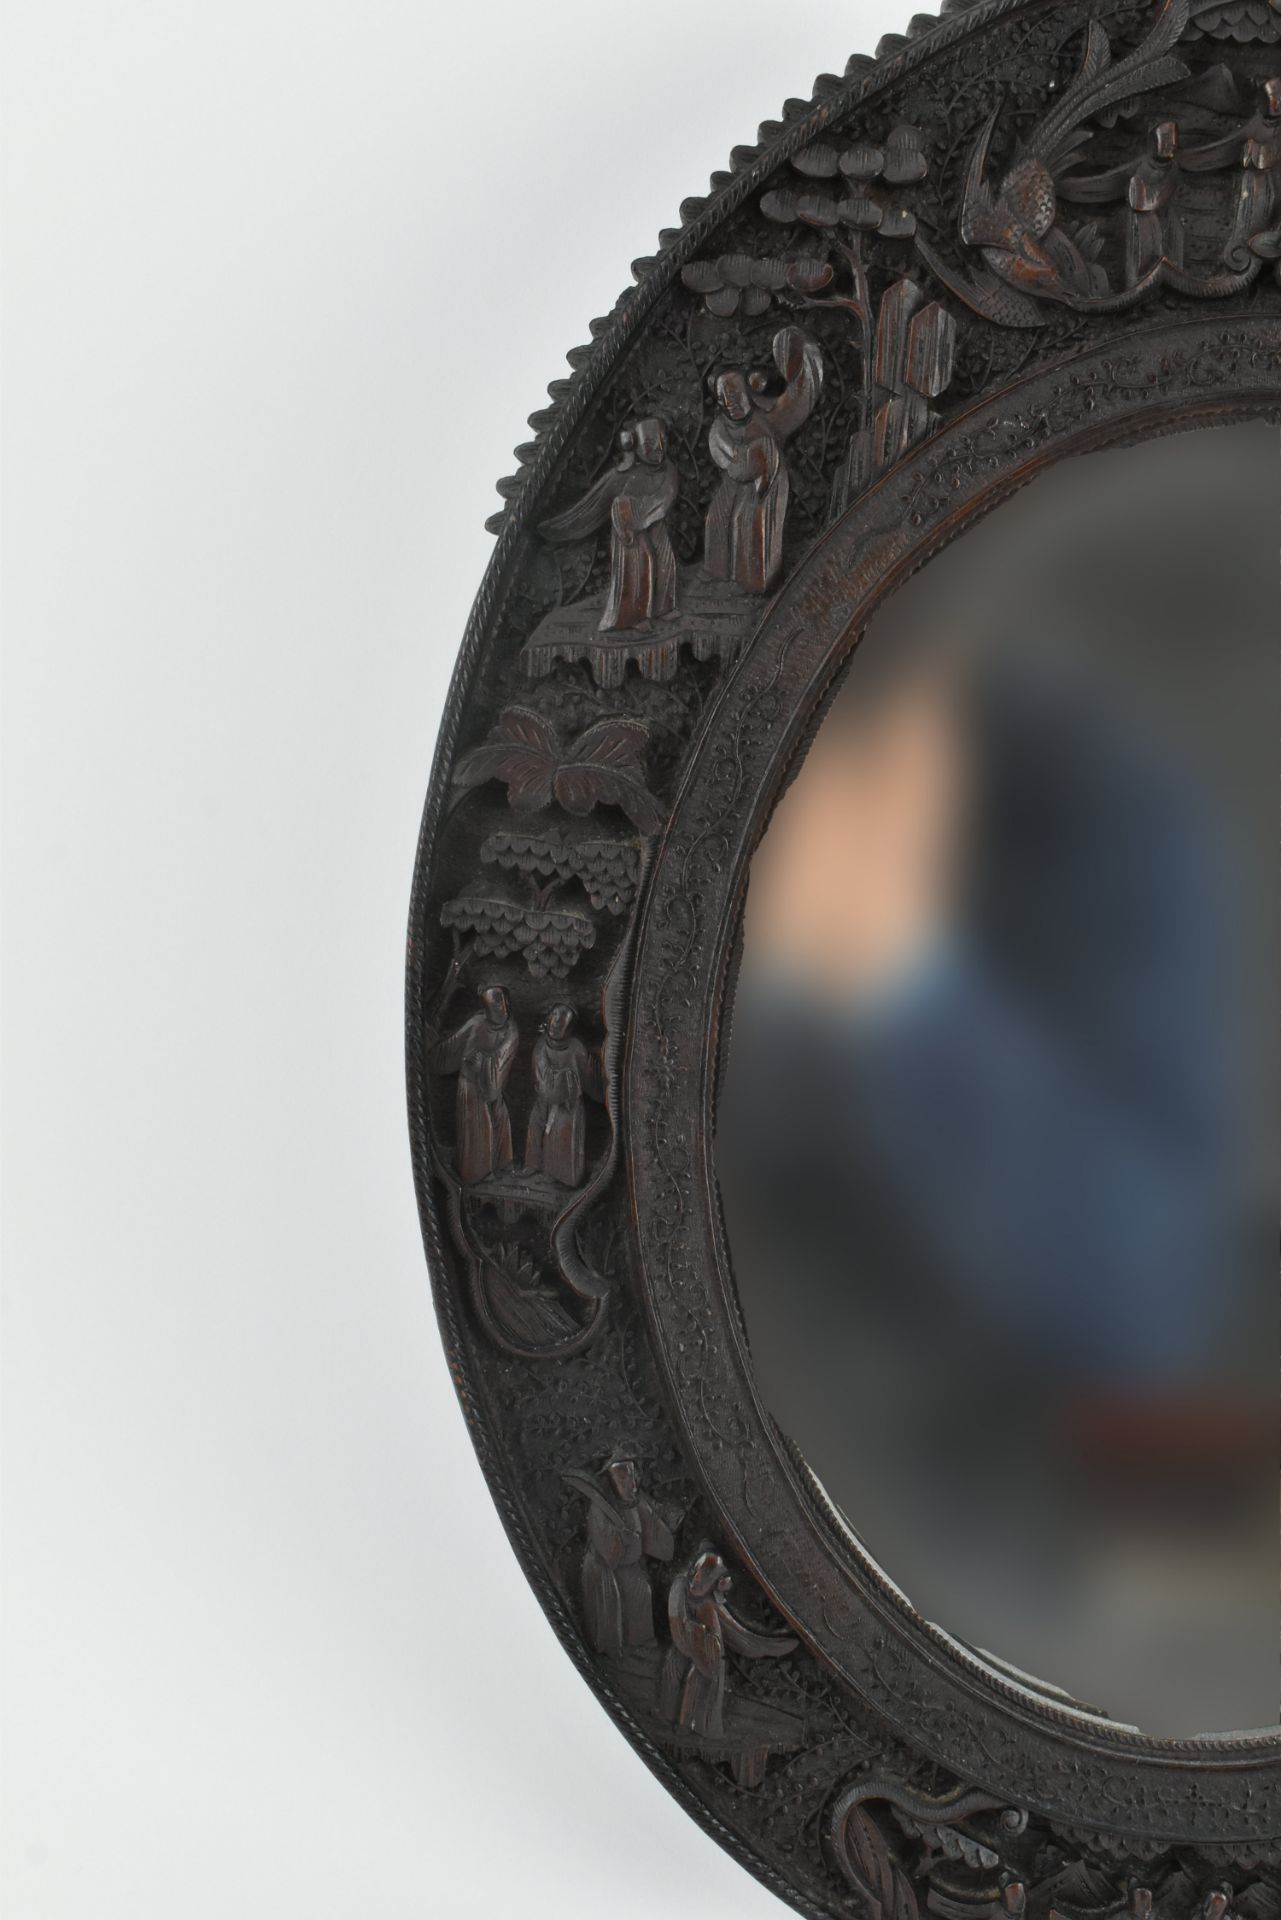 CHINESE WOODEN CARVED WALL MIRROR 民国 木框镜子 - Image 4 of 6